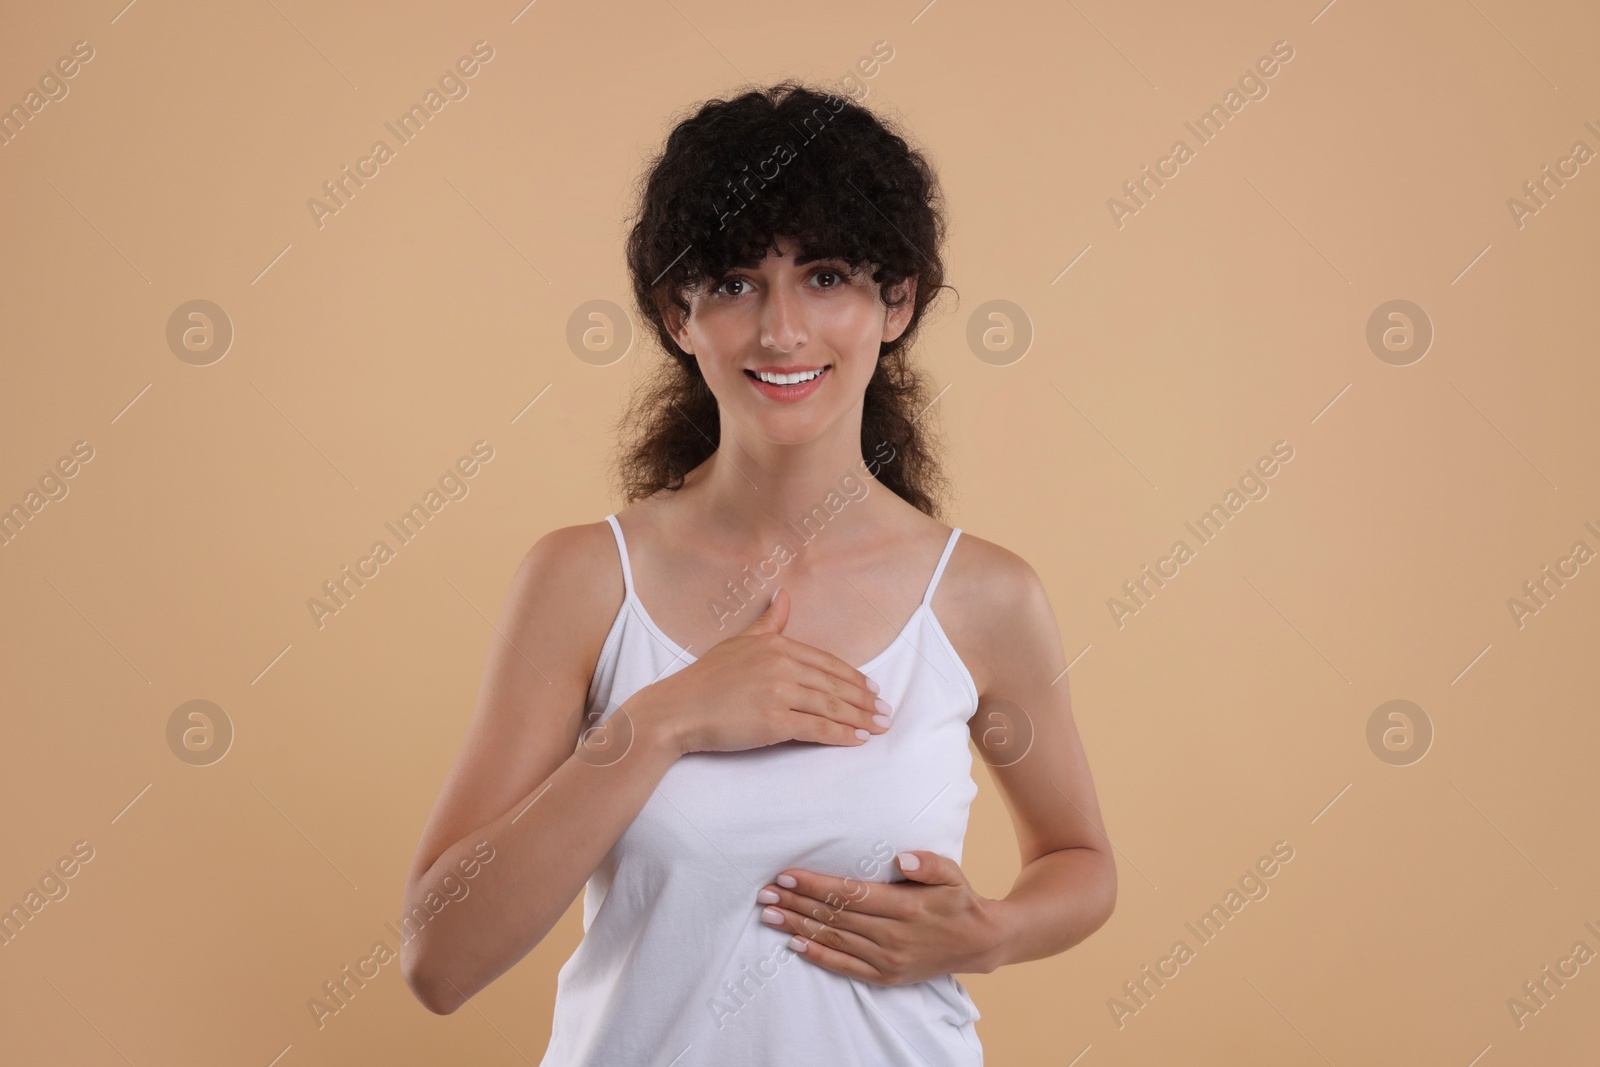 Photo of Smiling young woman doing breast self-examination on light brown background